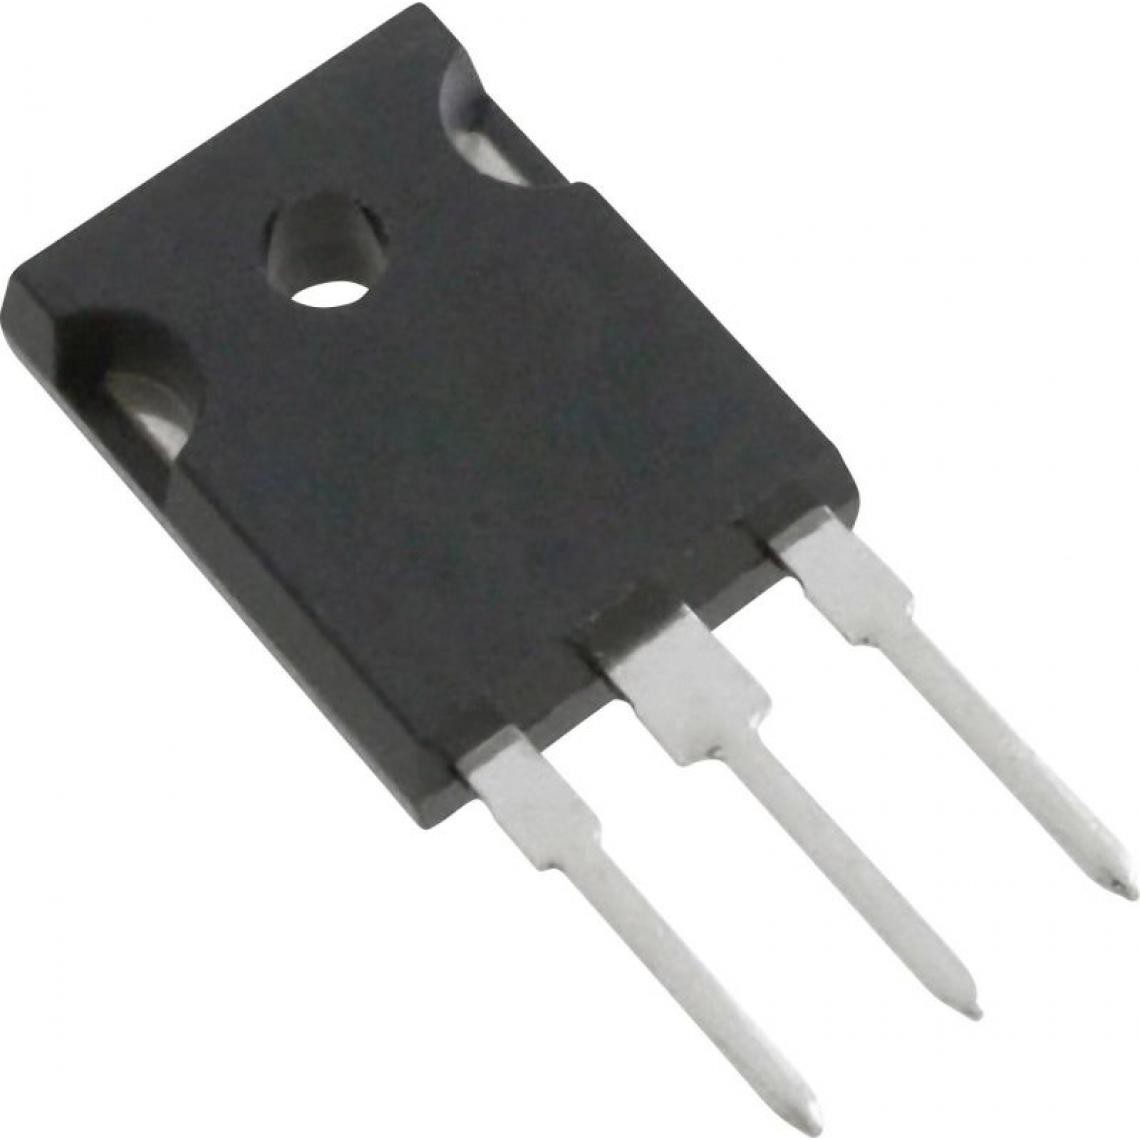 Inconnu - Transistor - IGBT - Simple Infineon Technologies SGW25N120 TO247-3-PG Simple Standard 1200 V 1 pc(s) - Fiches électriques